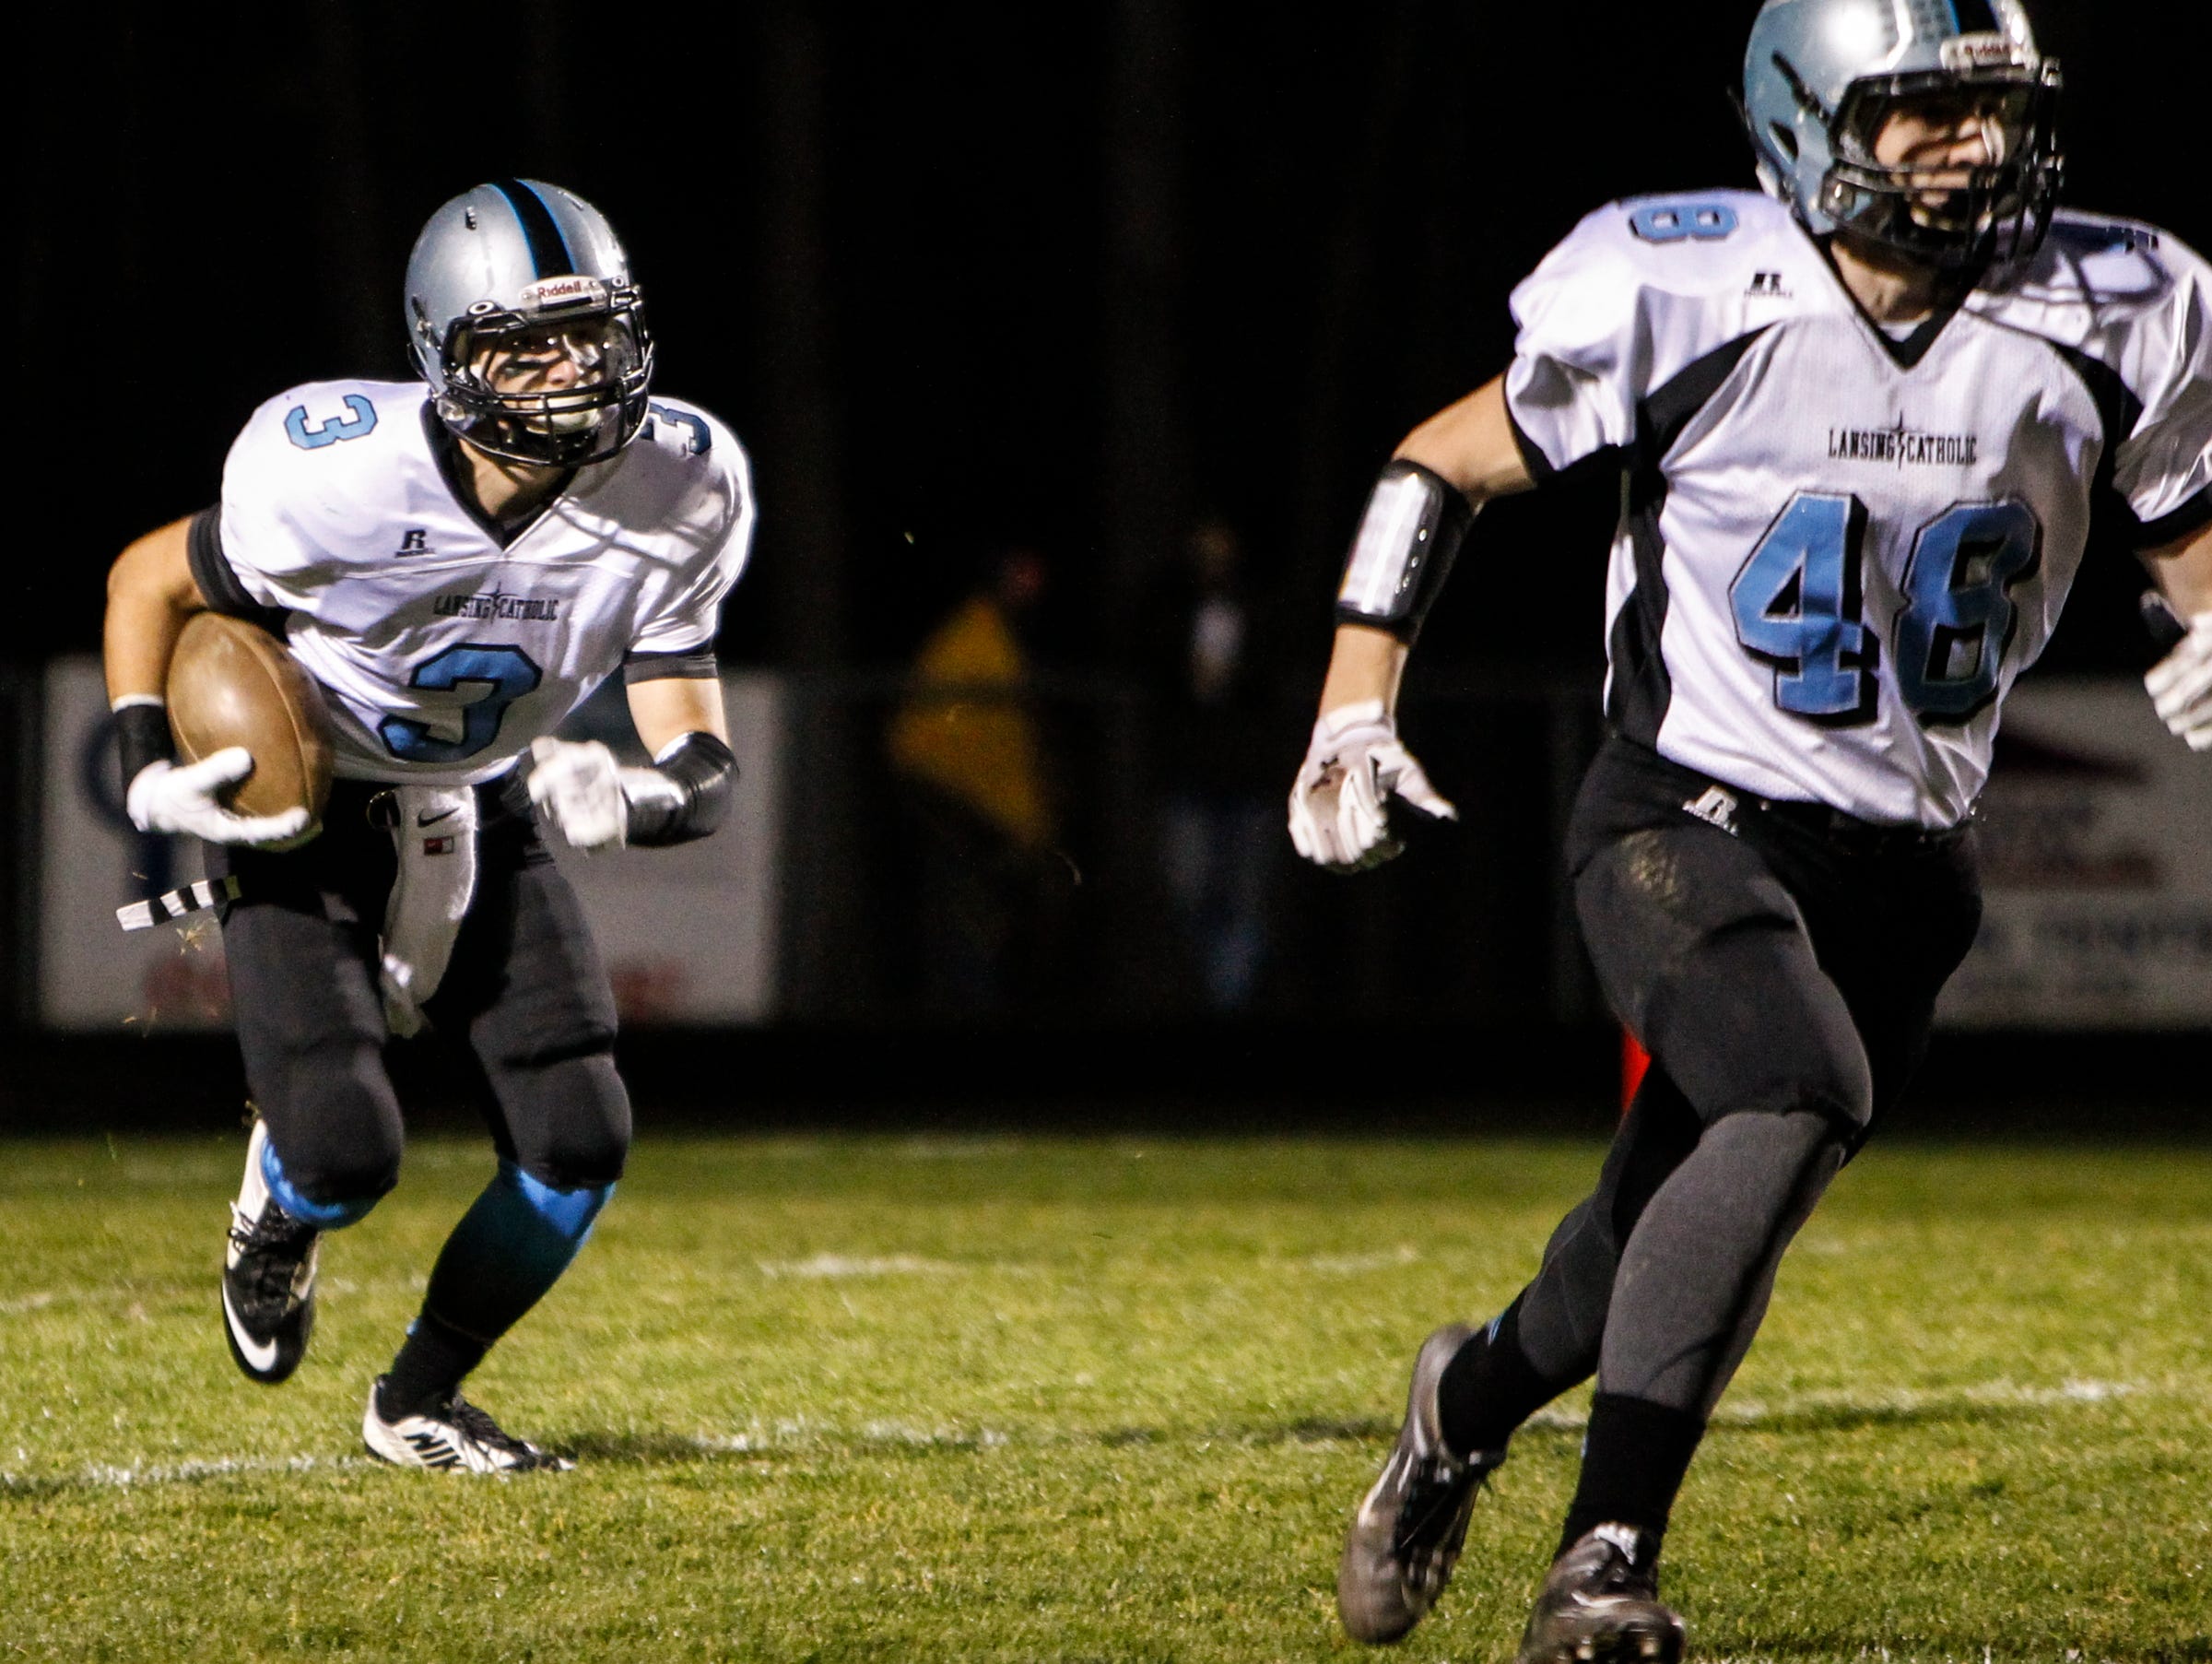 Ryan Ruiter (3) and Eli Whitney, right, will try to help Lansing Catholic reach the playoffs for an eighth straight year this fall. The Cougars have won a combined 24 games the last two seasons.